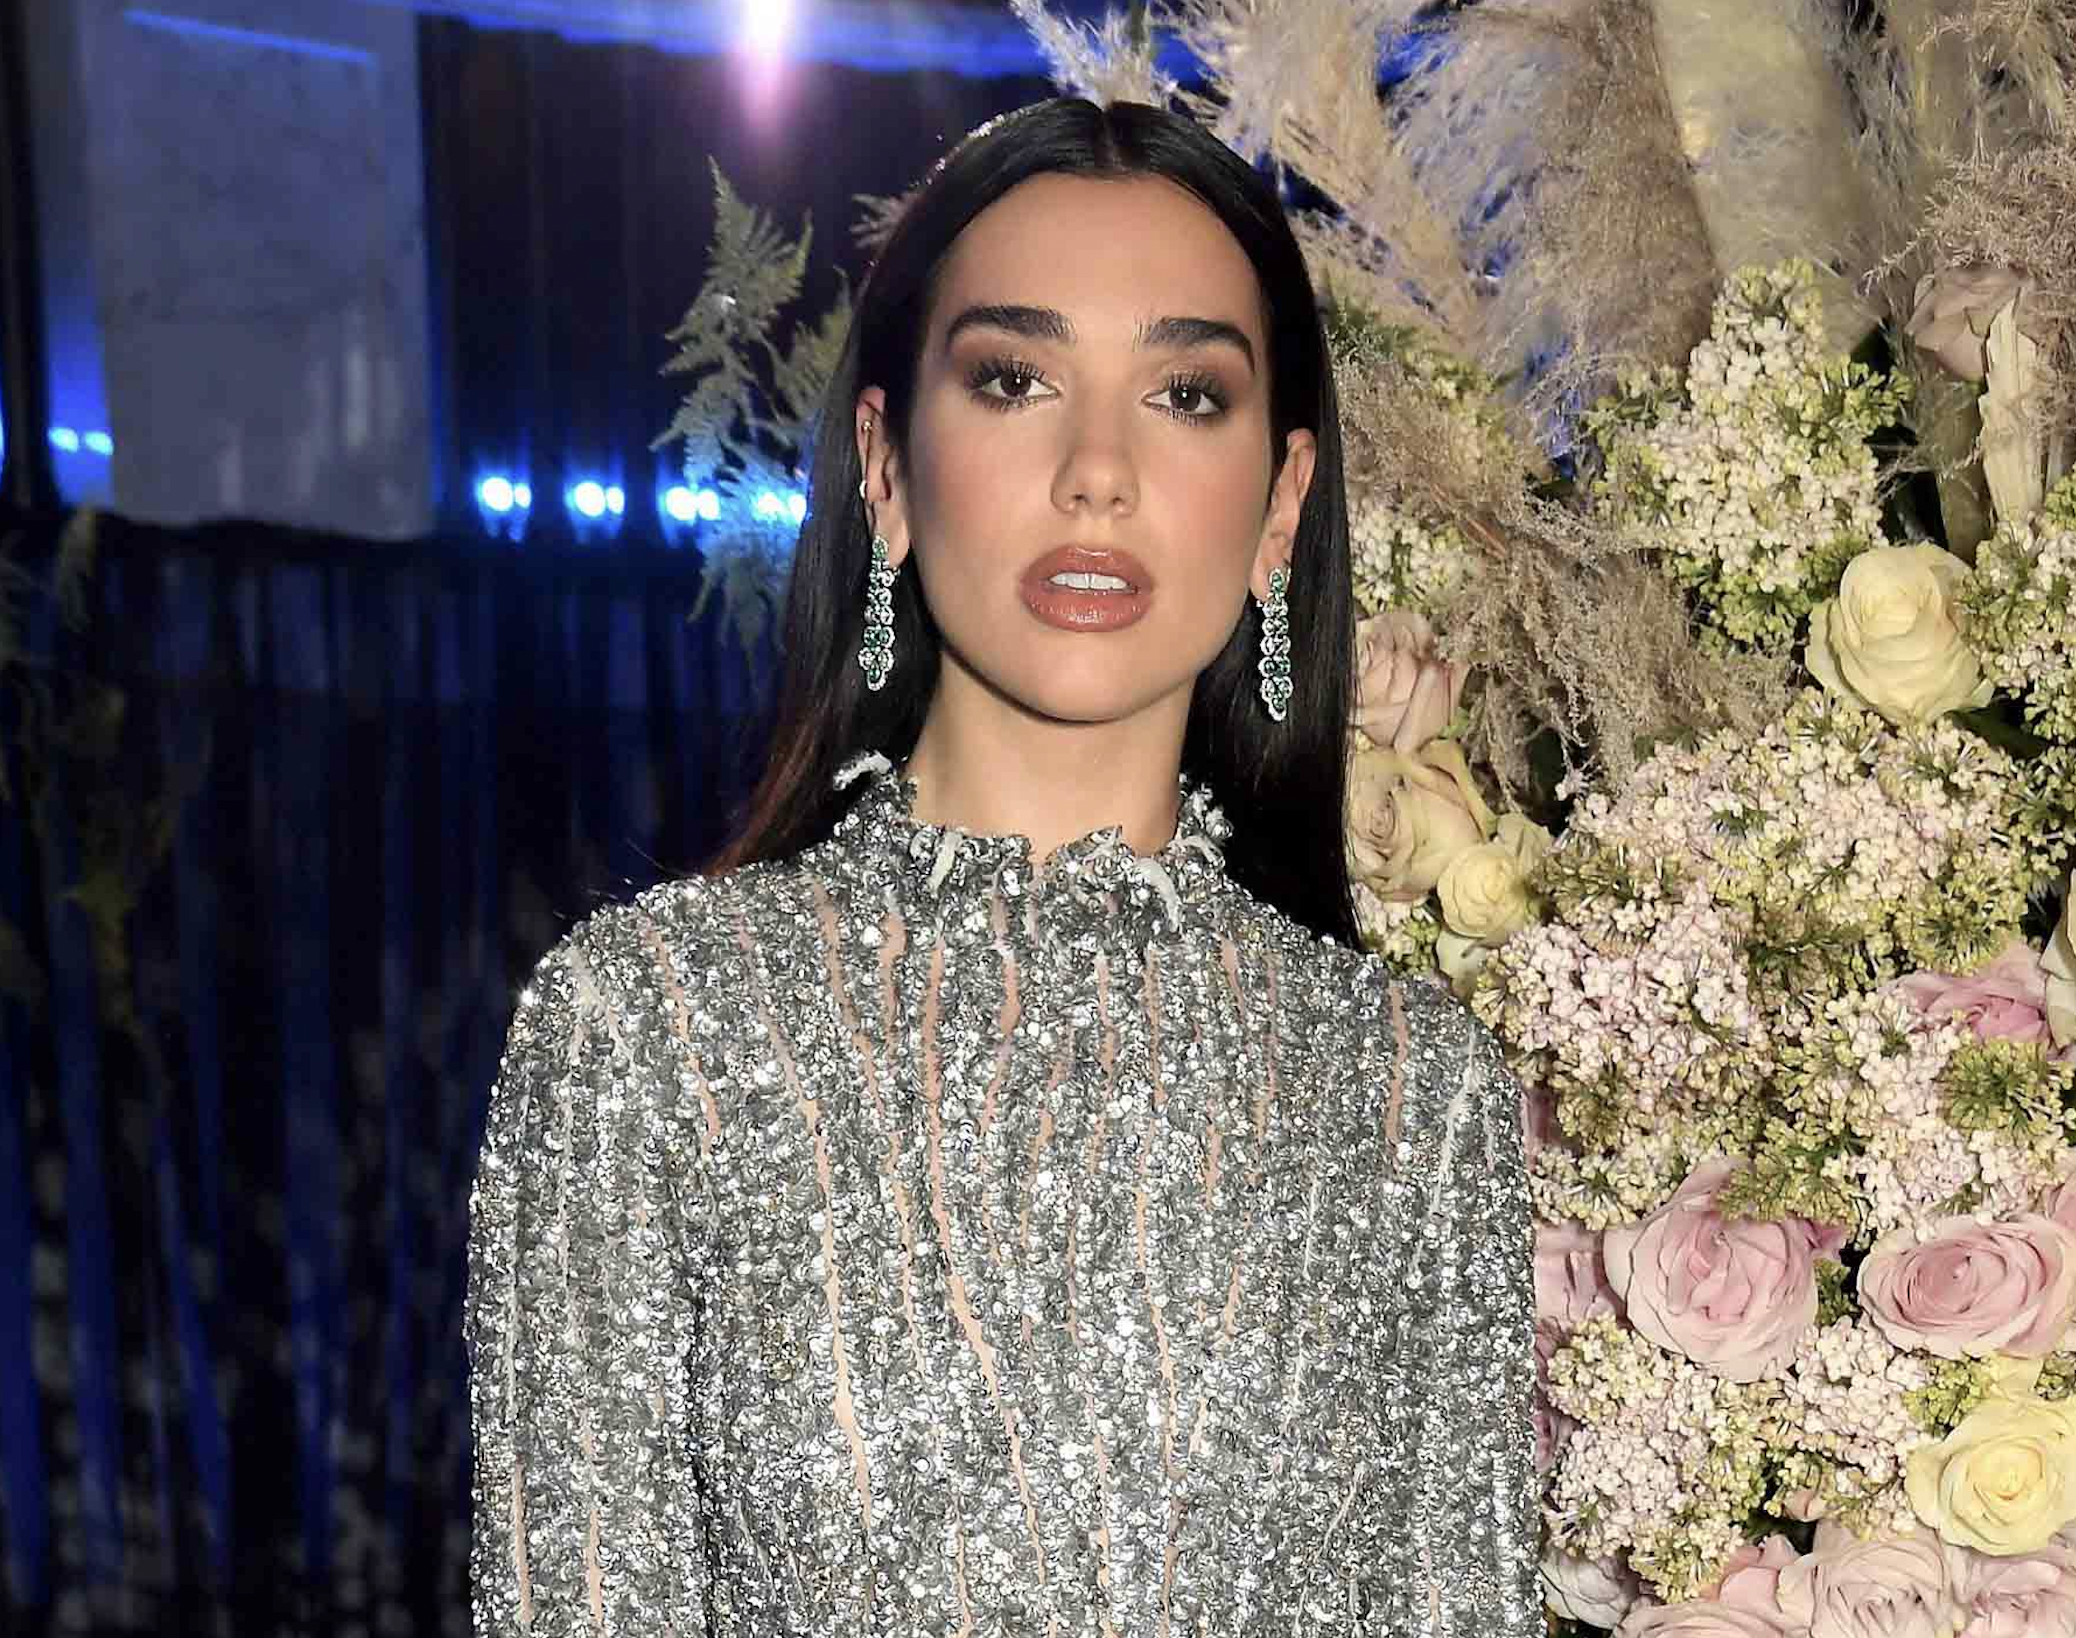 Take a page out of Dua Lipa’s book and match your dress with statement jewellery like her Chopard droplet earrings, worn to the Elton John AIDS Foundation Academy Awards viewing party on April 25. Photo: Getty Images/Chopard